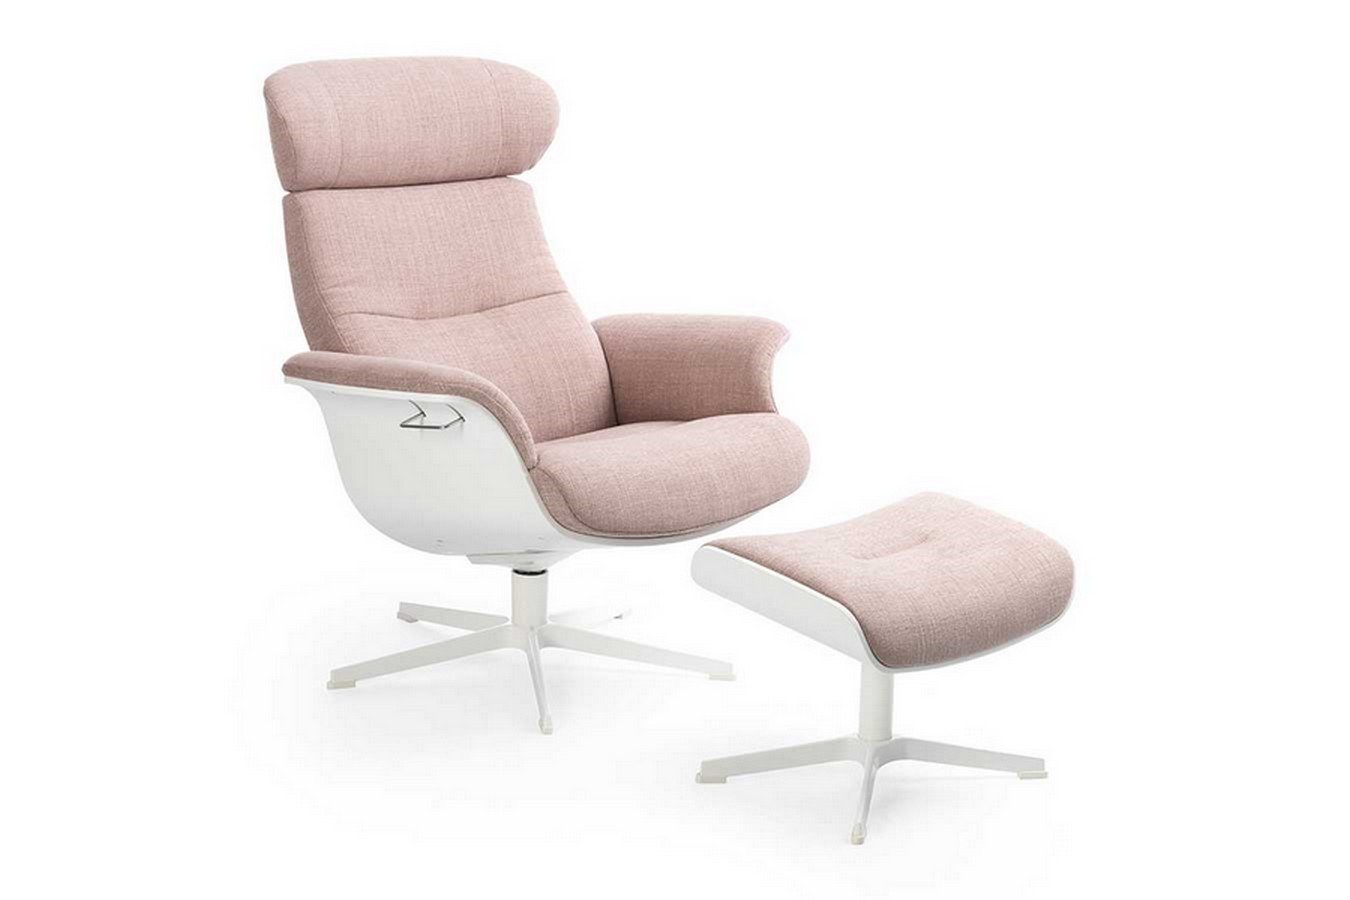 daslagerhaus living Loungesessel Drehsessel Conform Timeout aus Stoff in pink ohne